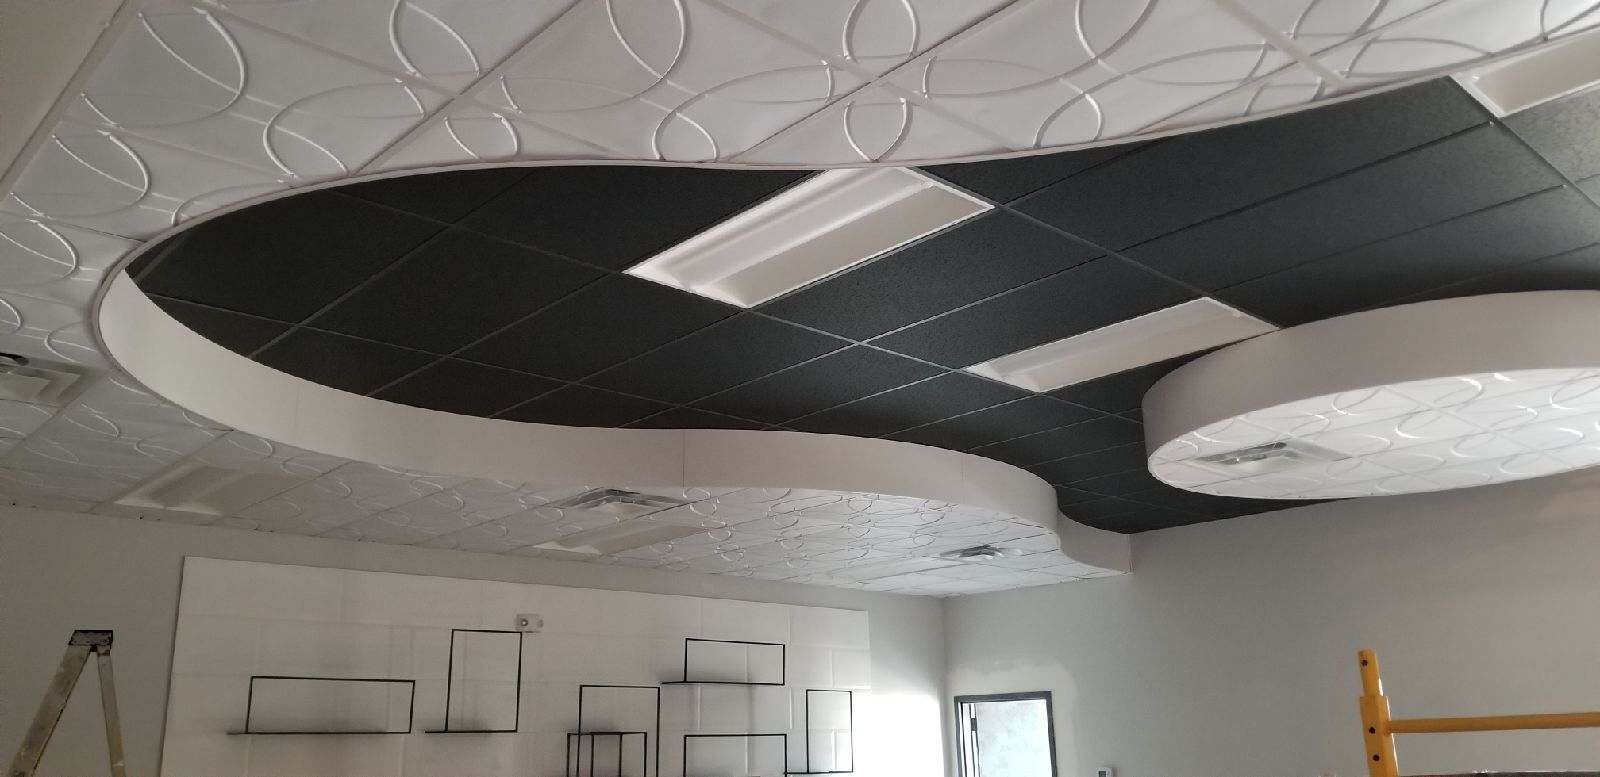 A room with many white and black ceiling tiles.